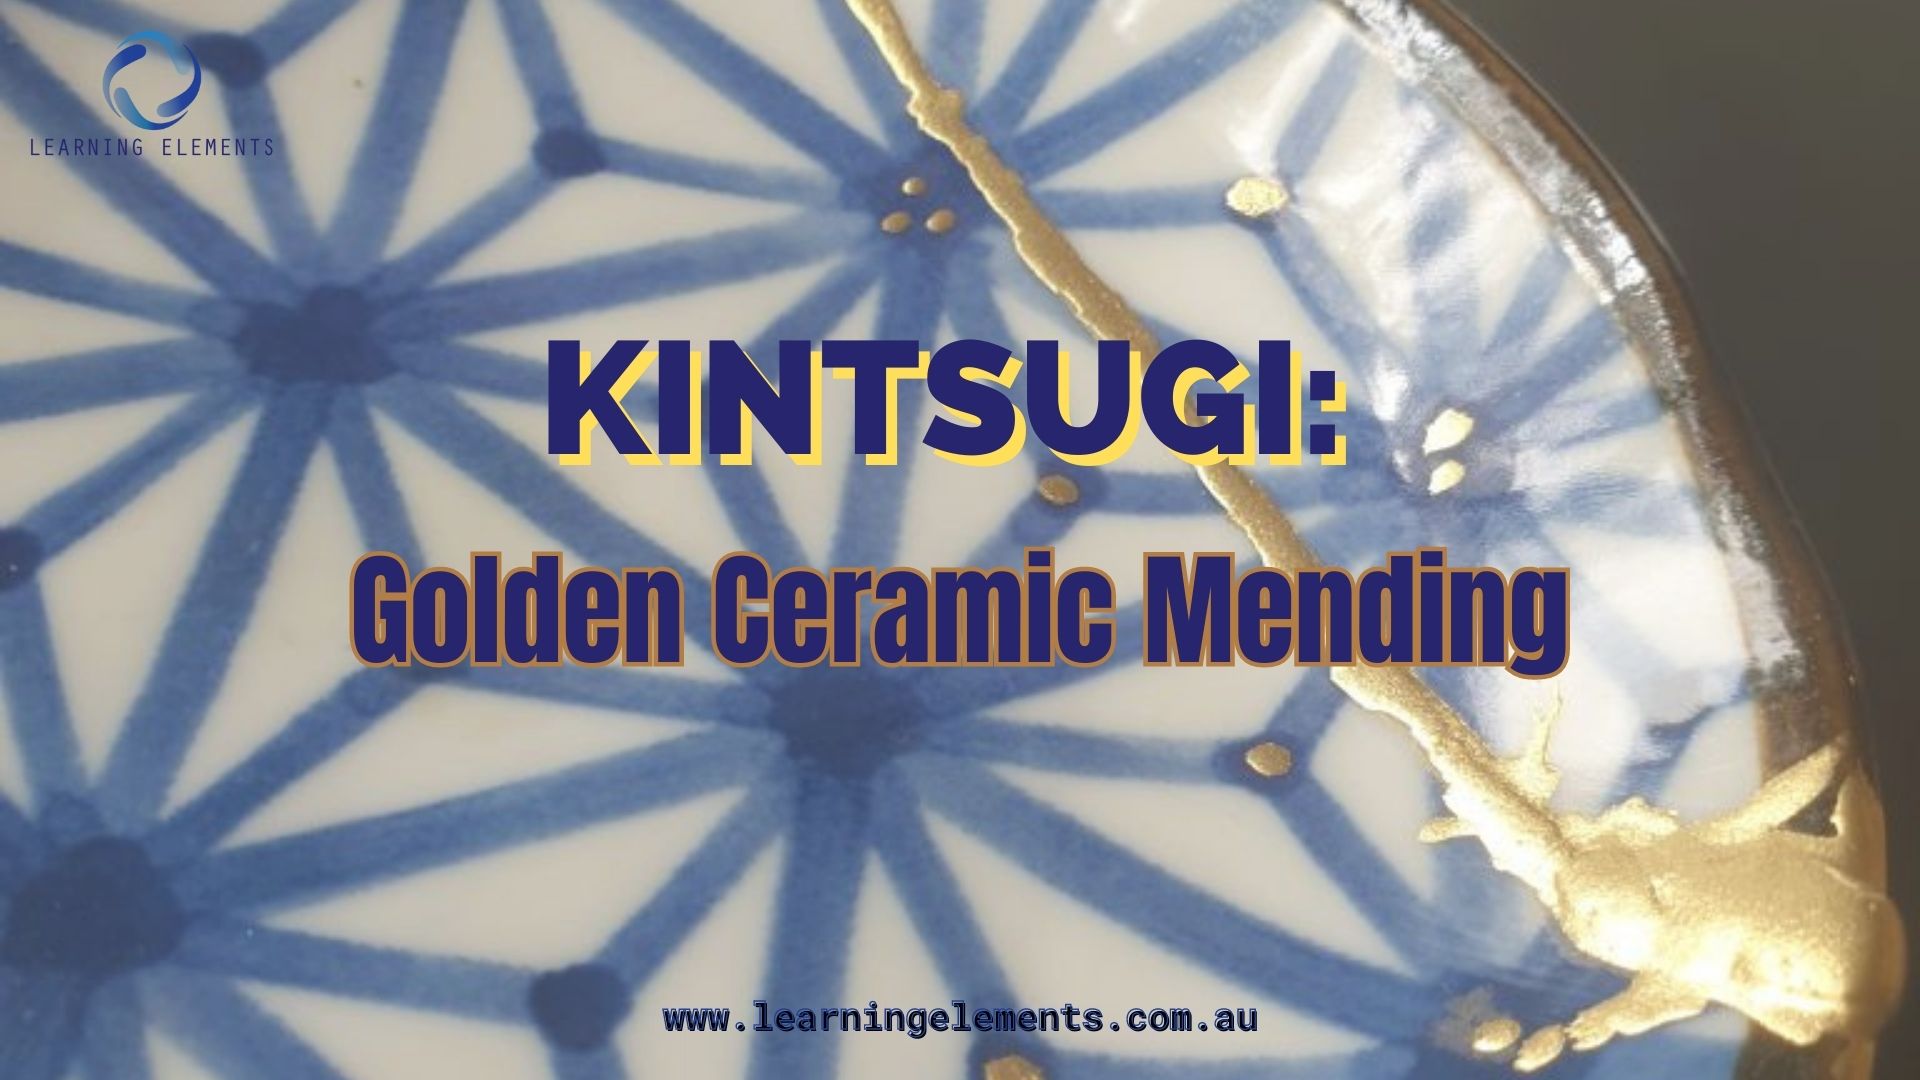 Personal Development and how it relates to Kintsugi Golden Ceramic Mending or golden joinery